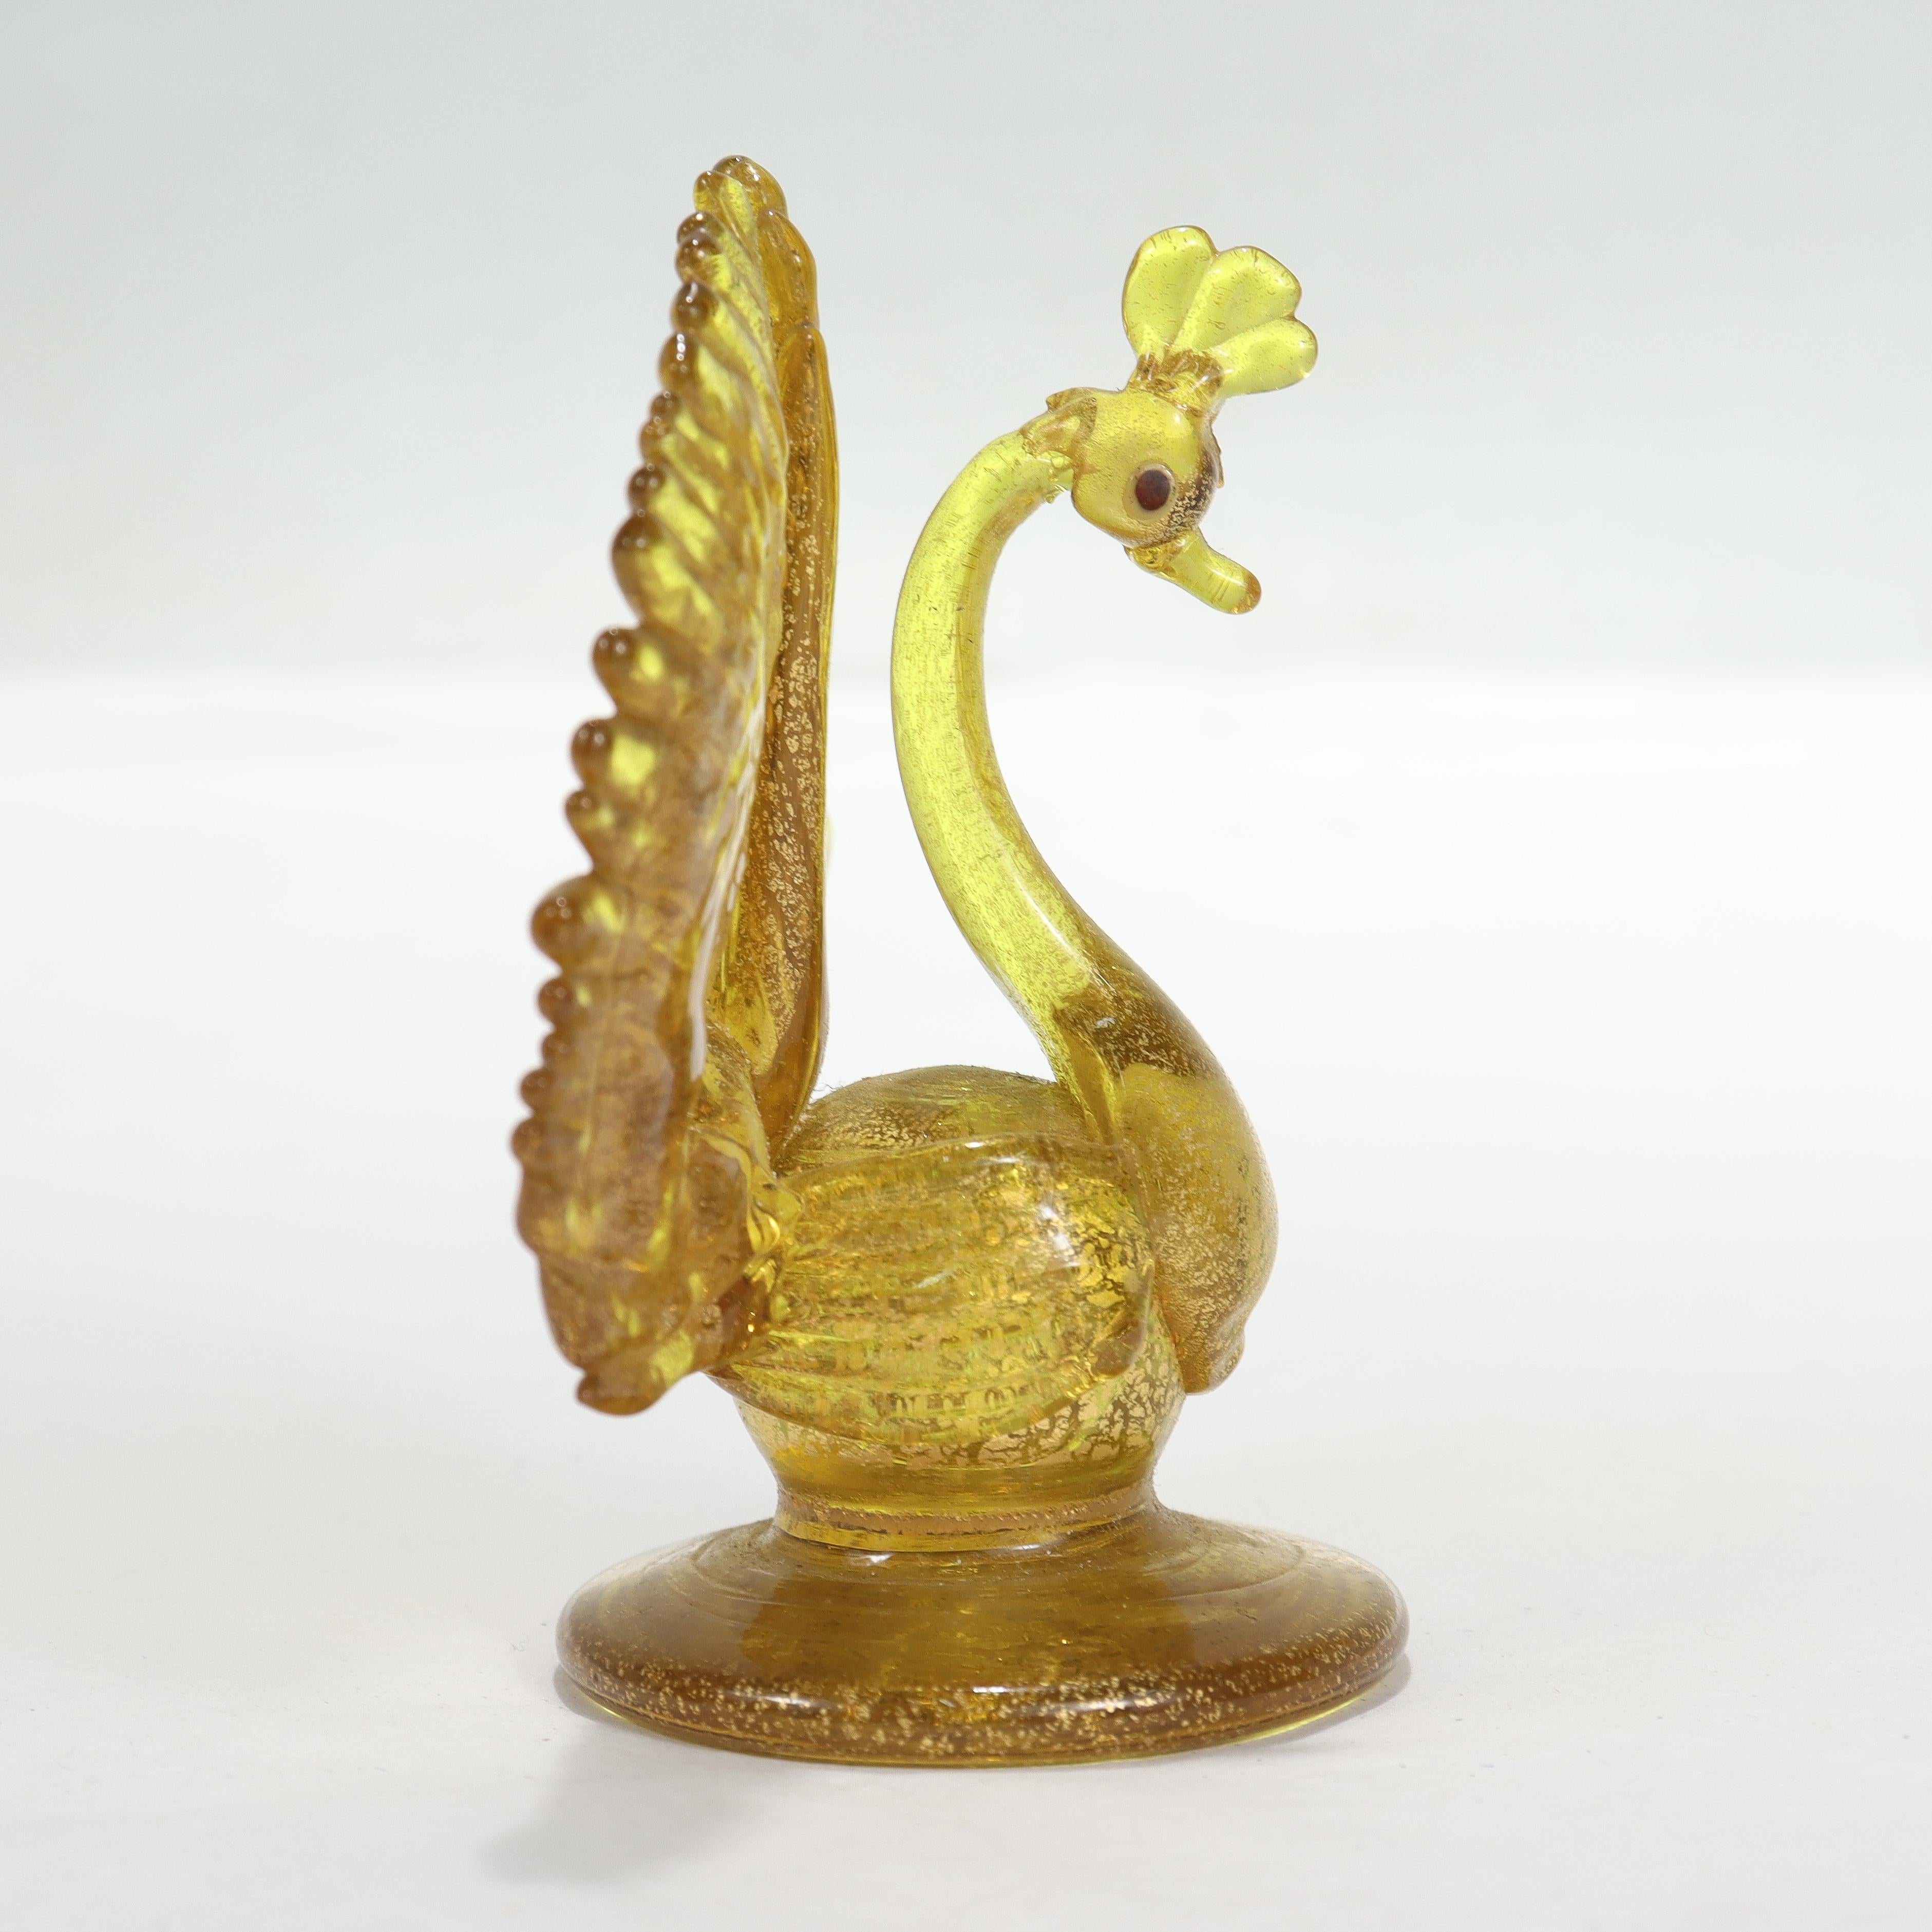 A fine vintage Venetian or Murano glass figurine or place card holder.

In the form of a peacock in yellow glass with gold foil with dark blue eyes.

Attributed to Salviati.

Simply a wonderful Venetian or Murano glass